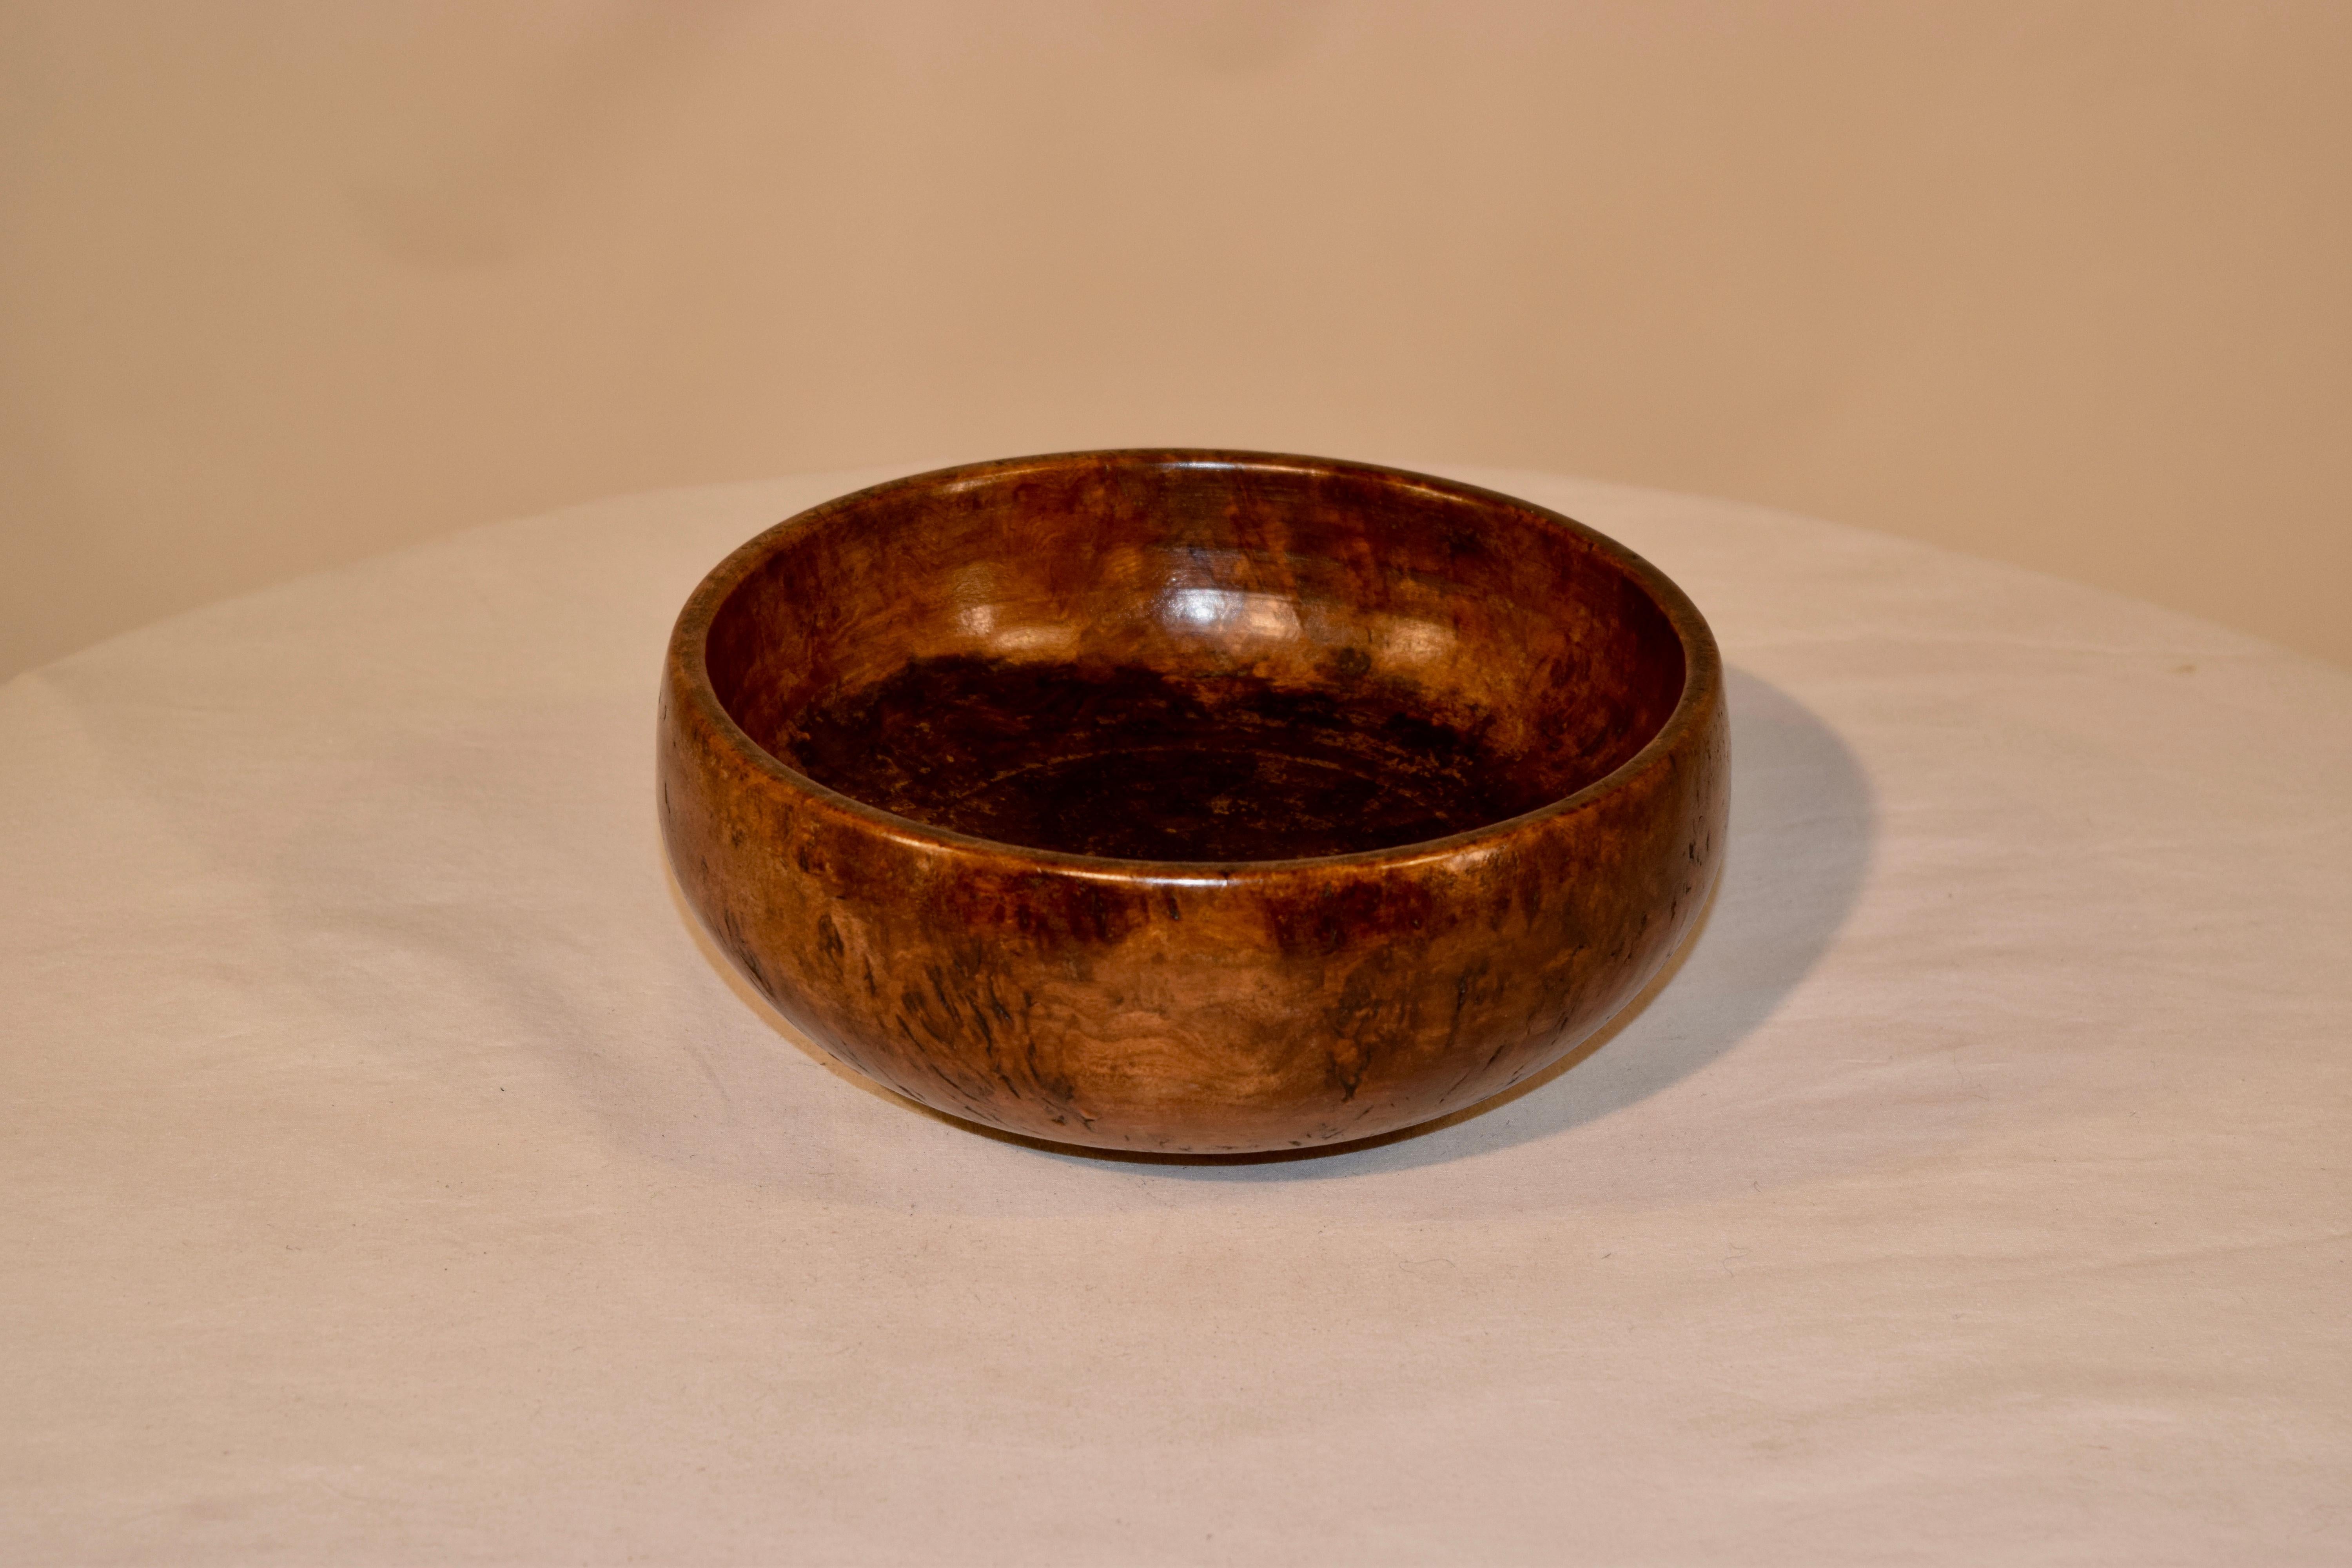 19th century English hand turned bowl made from burl walnut. Stains on interior from age and use.